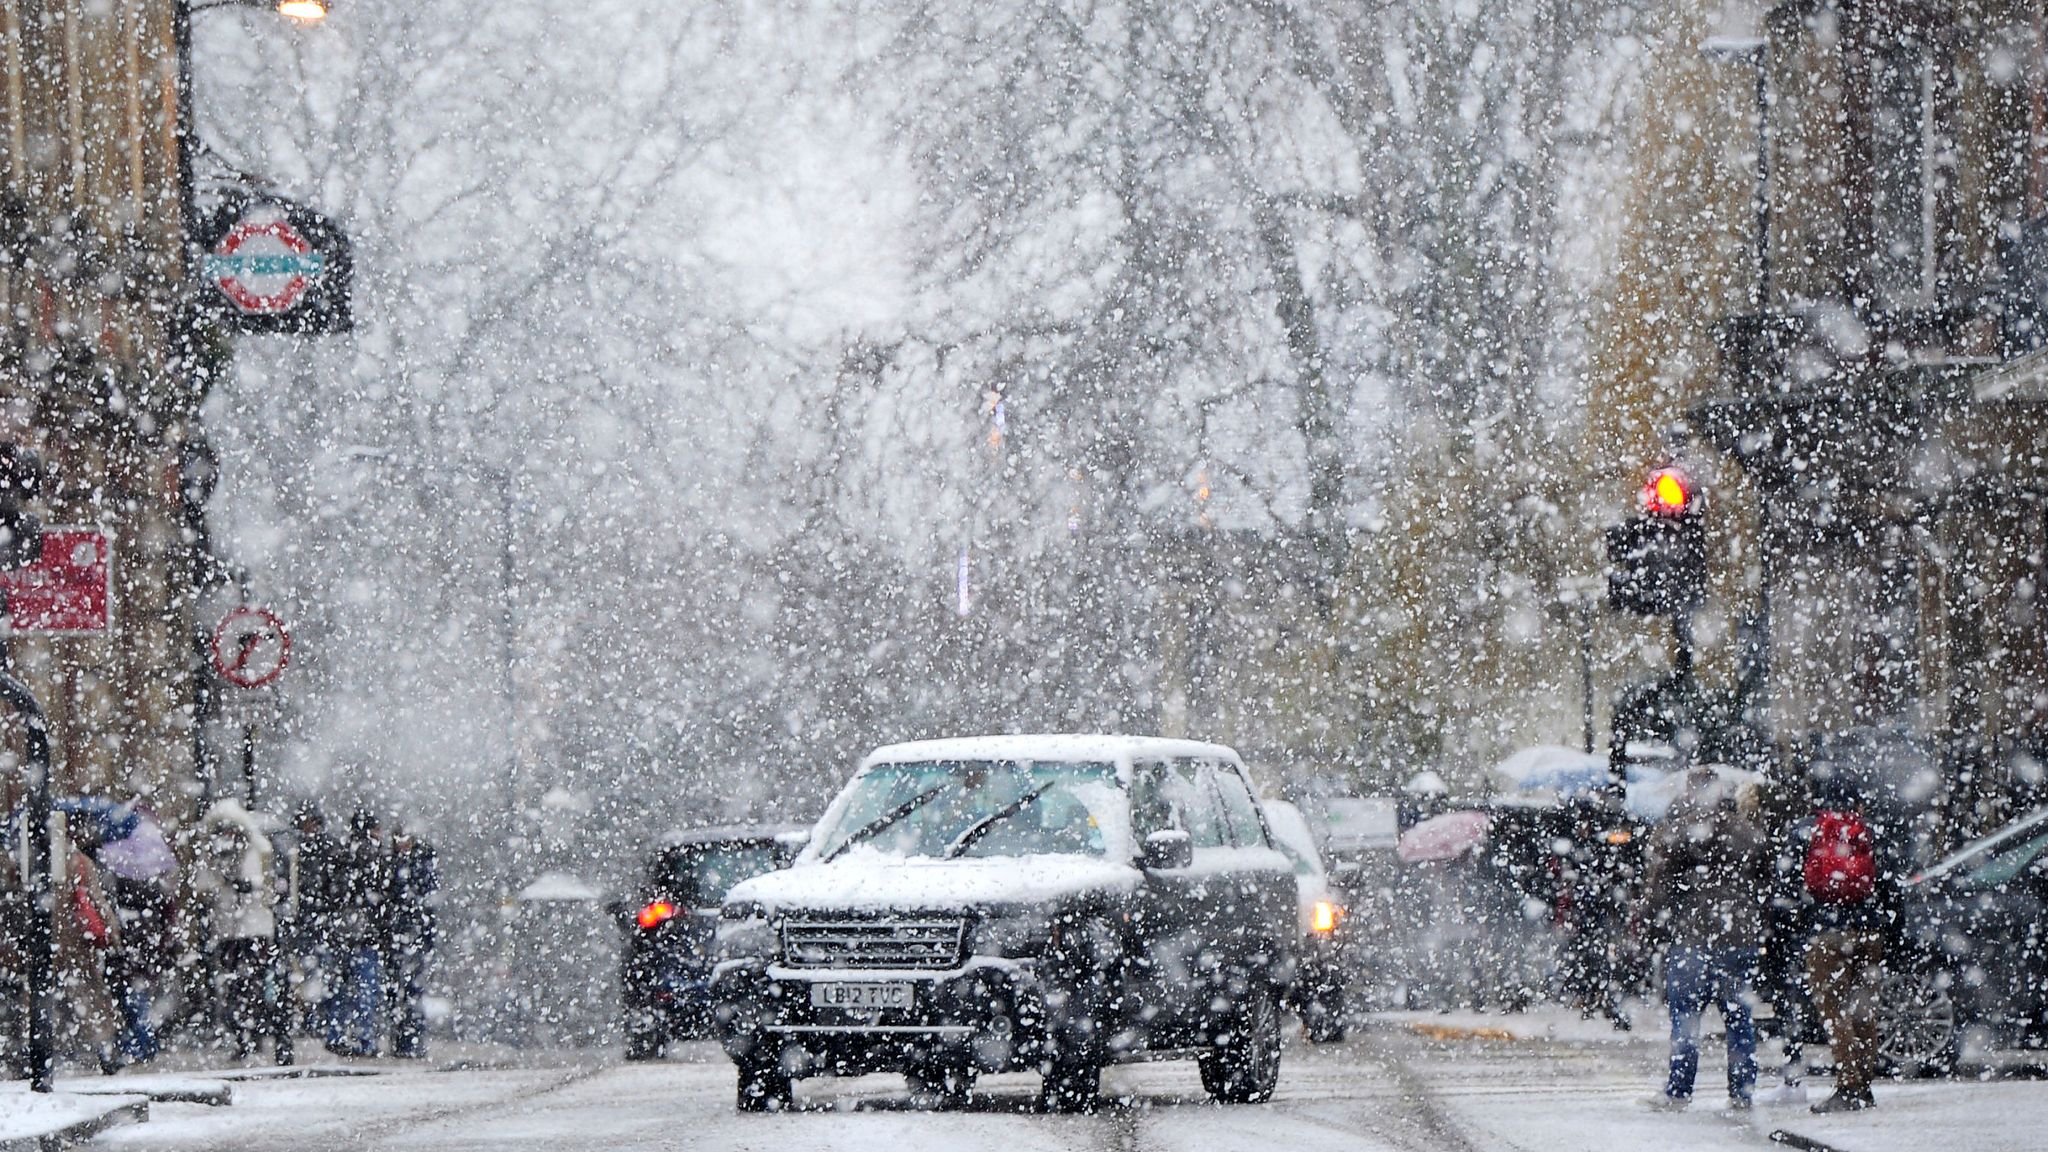 Snow falls on icy UK, causing treacherous conditions and travel